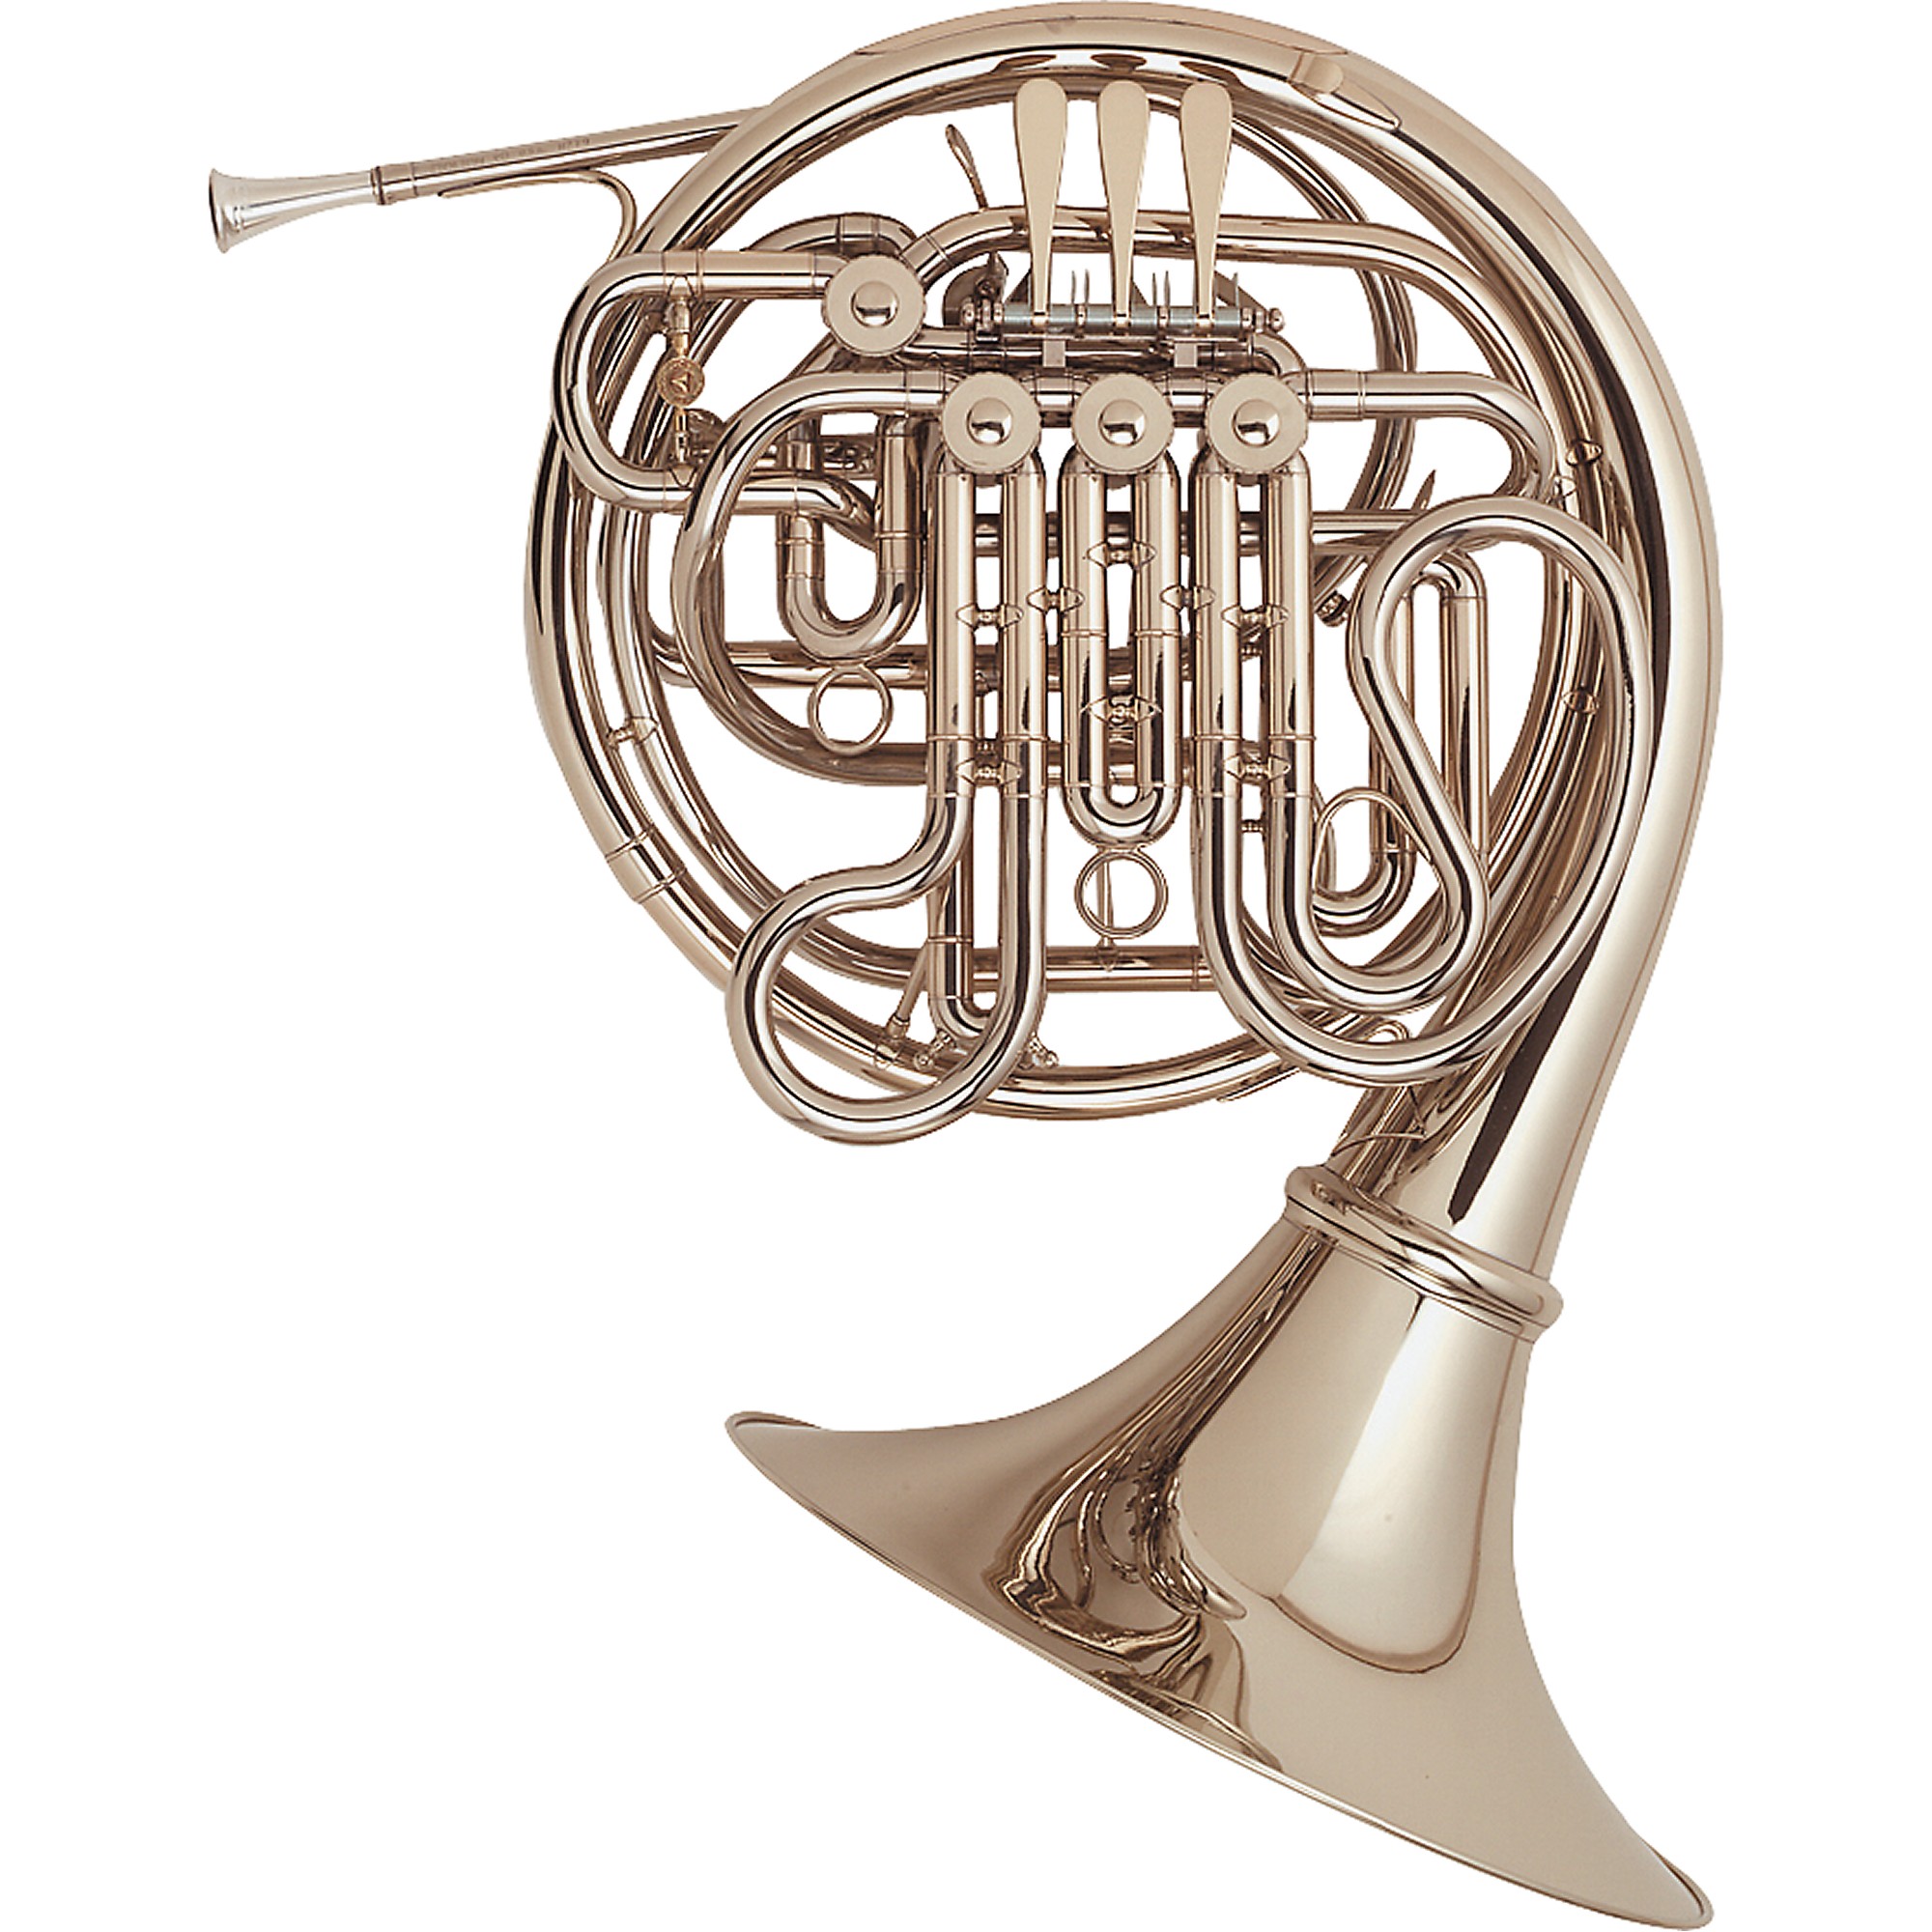 Holton H279 Farkas Professional French Horn | Music & Arts